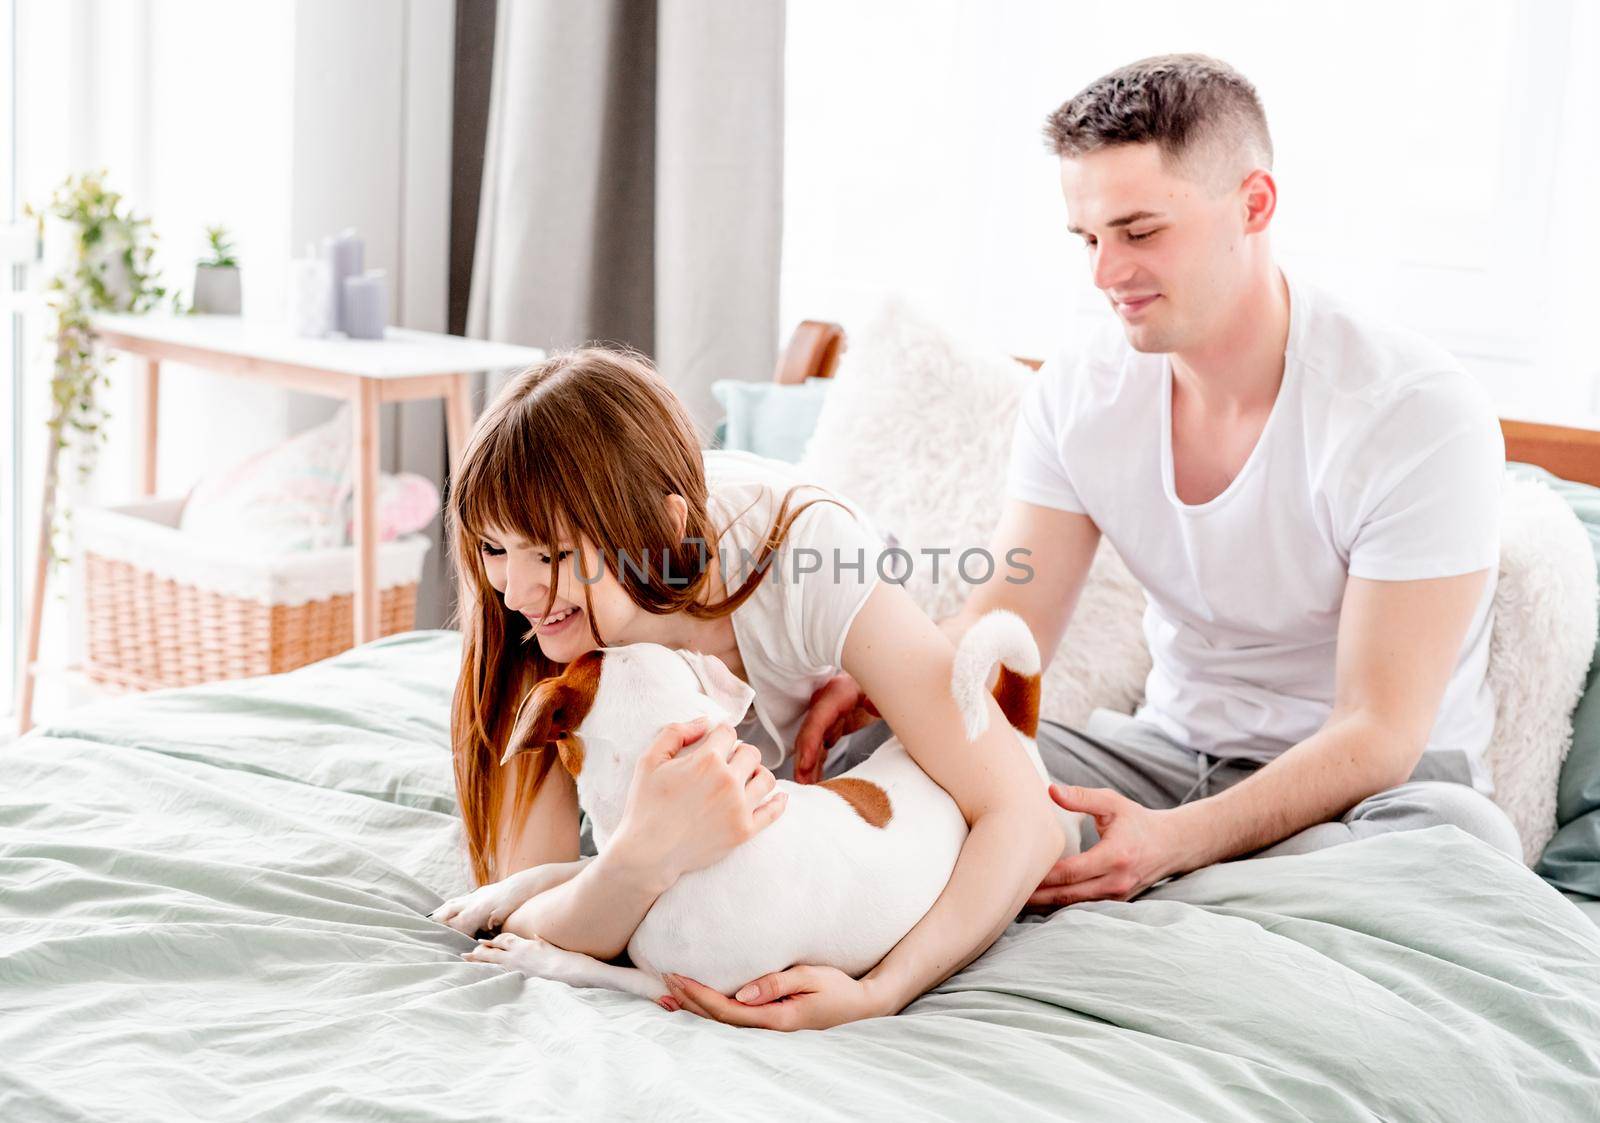 Couple in the bed with dog by tan4ikk1